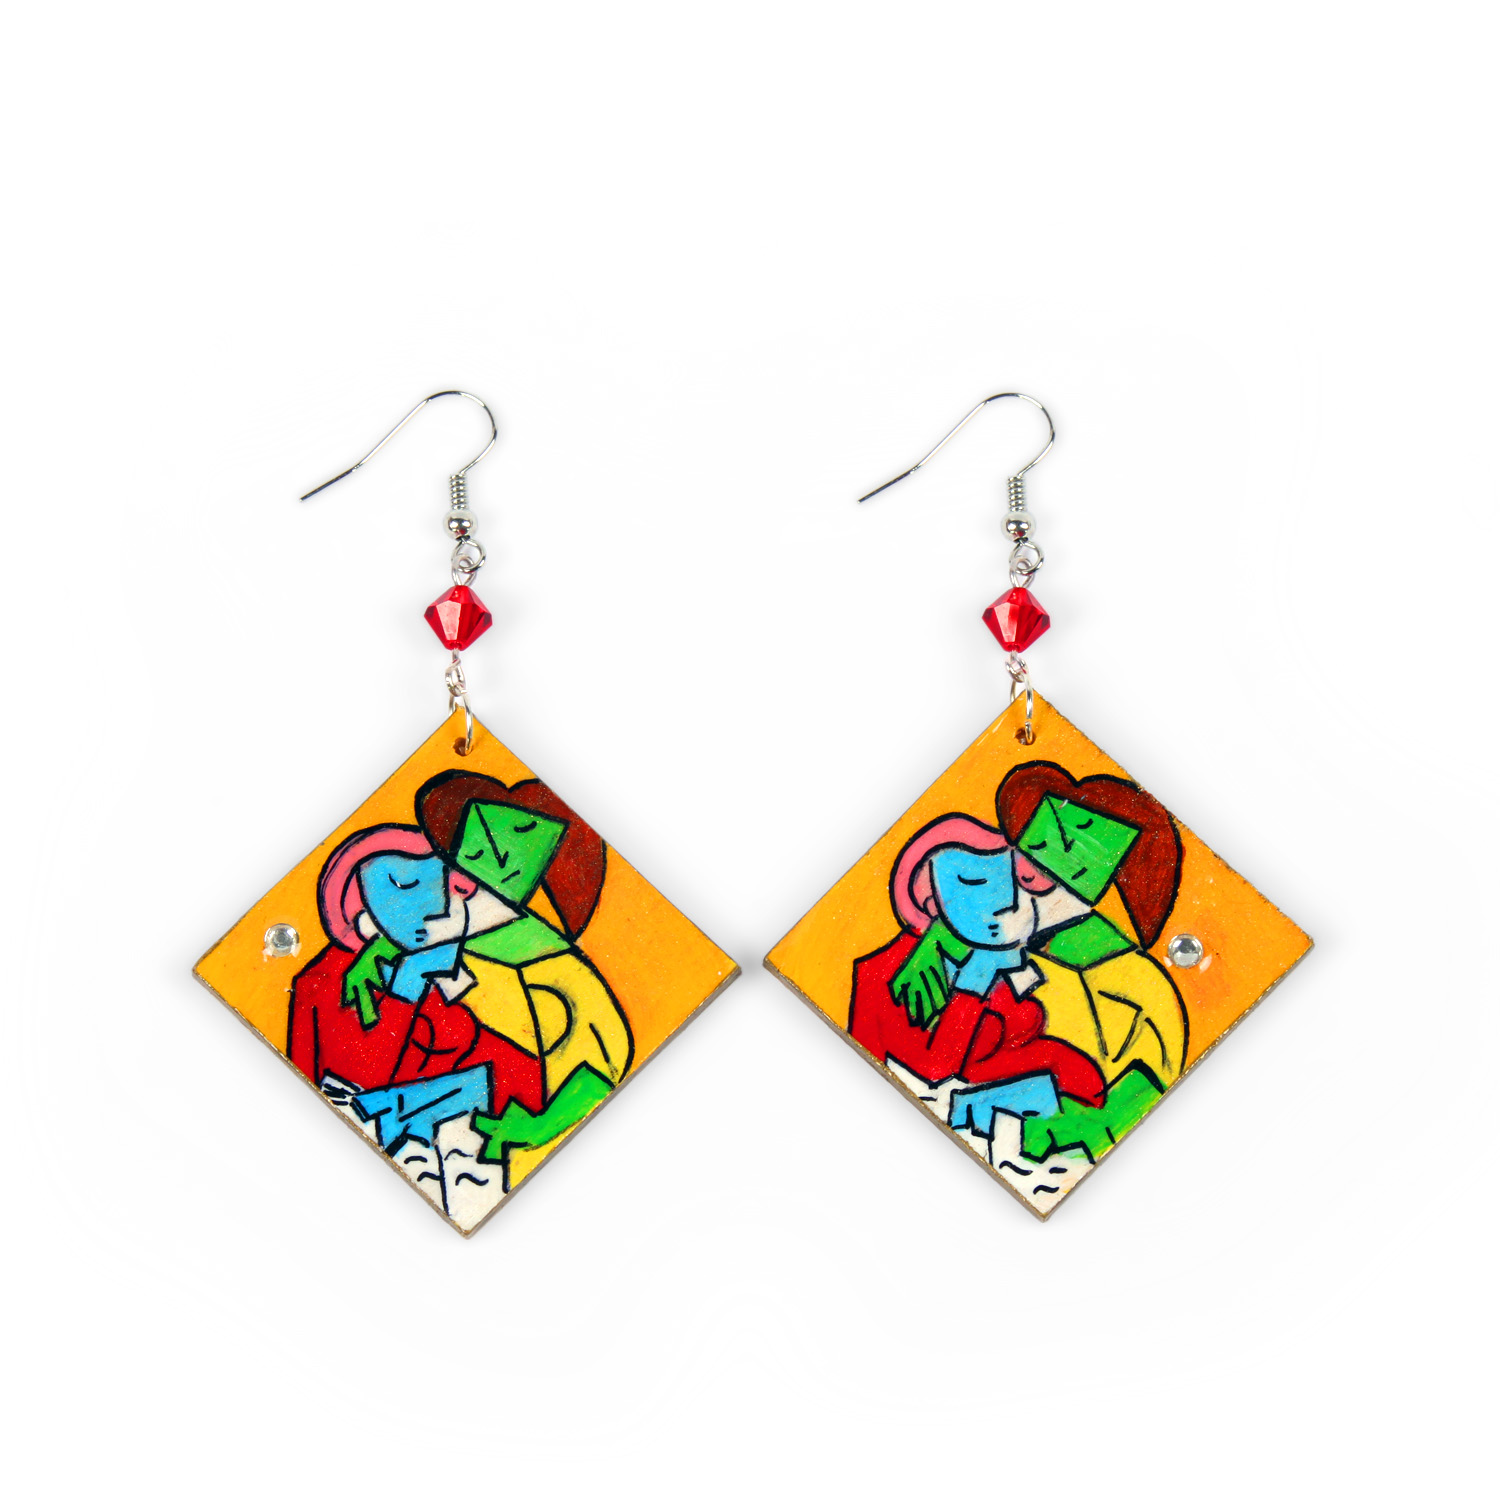 Hand painted earrings - Two Girls Reading by Picasso